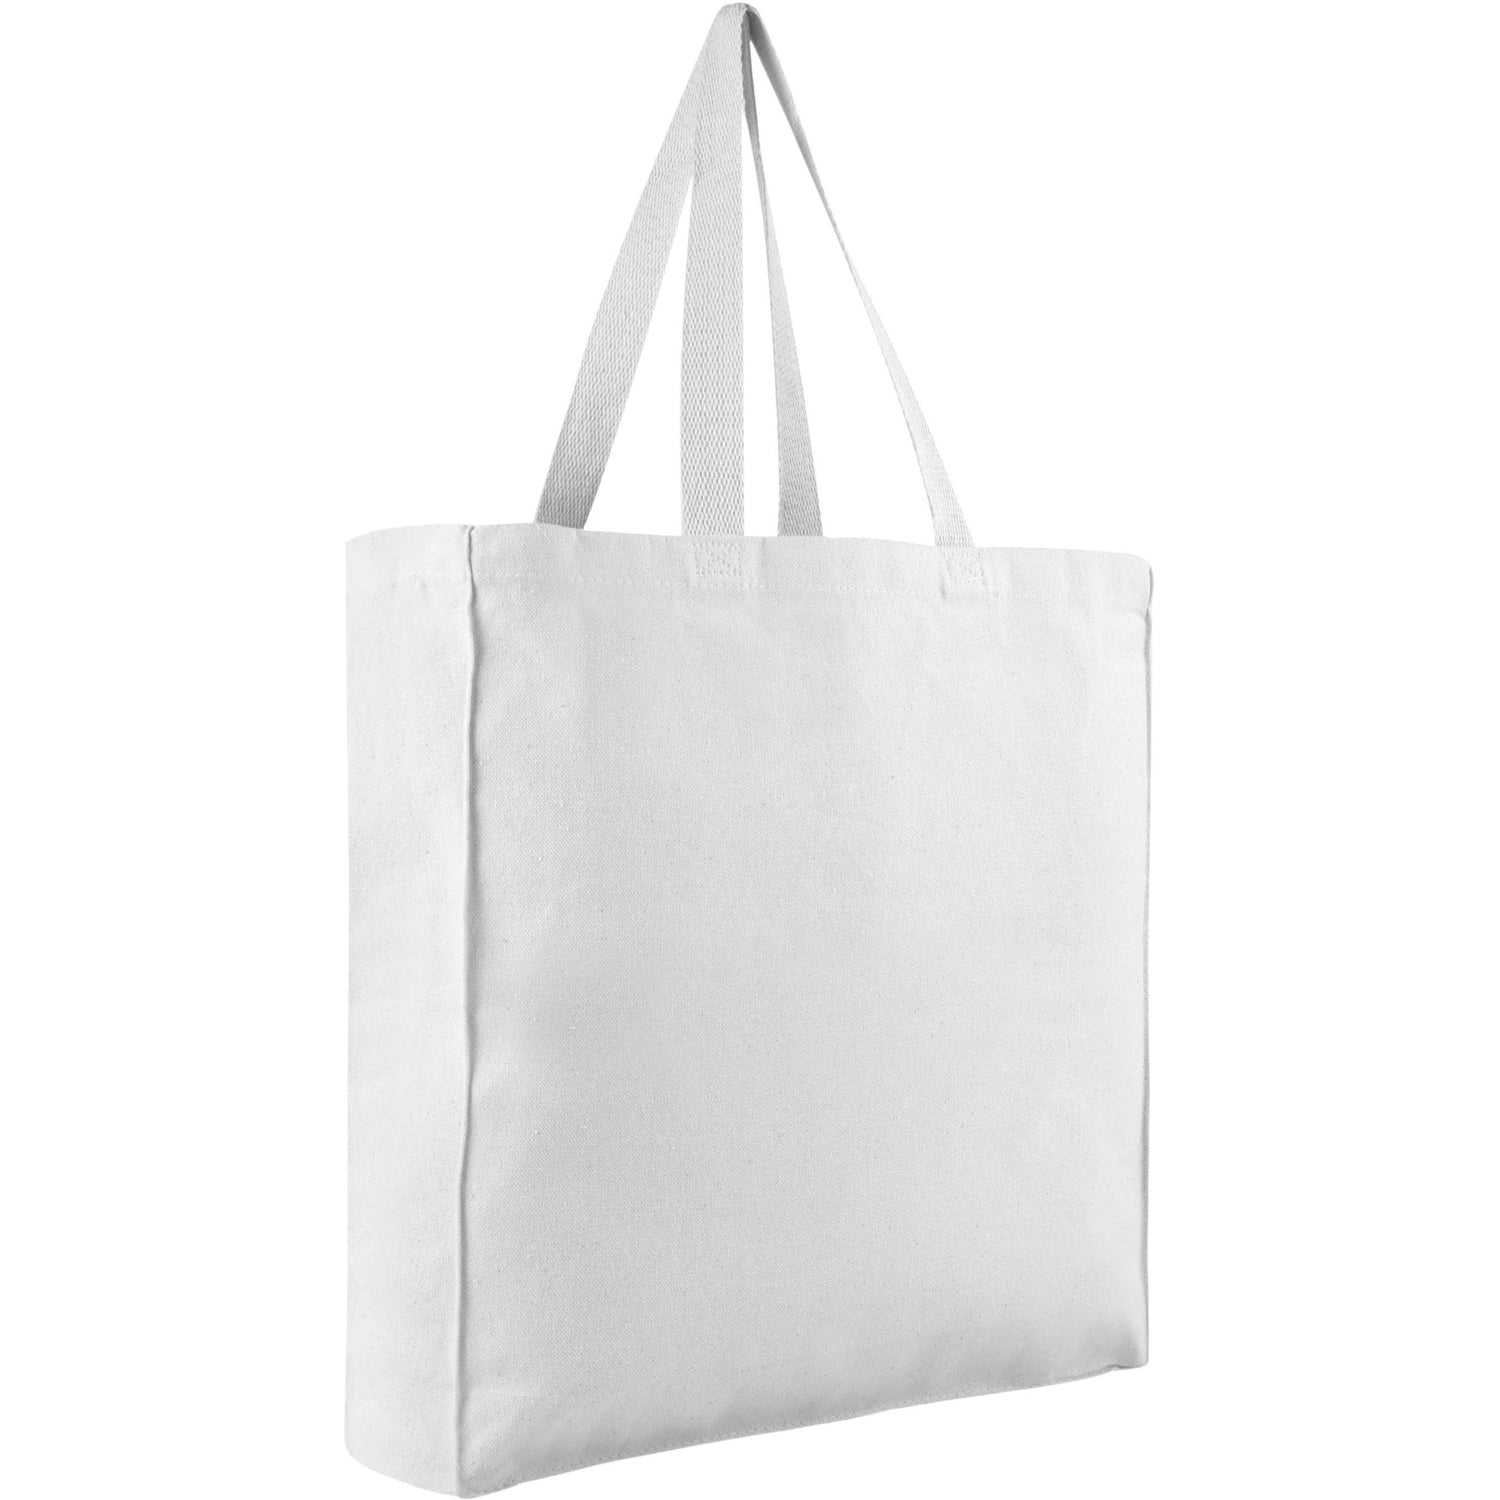 Heavy Canvas Shopping Tote Bag W/ Side and Bottom Gusset - Single Bag ...